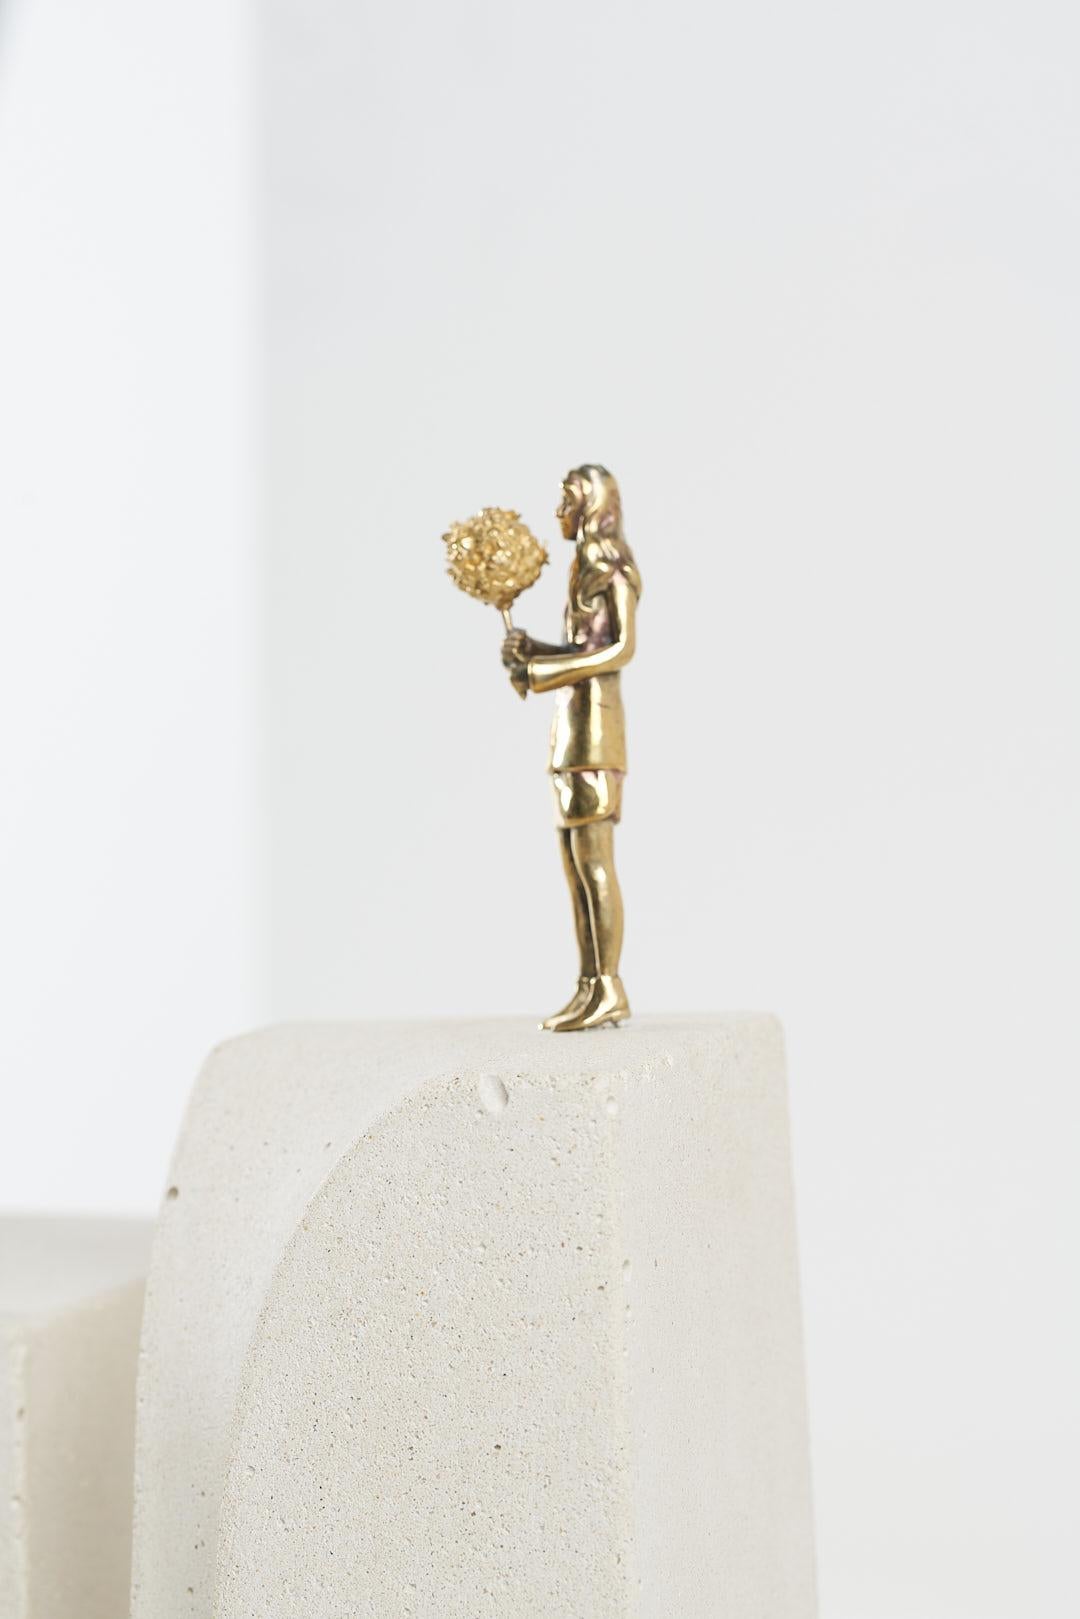 Minimalist Sinestesia Series, Concrete and Brass Girl Sculpture N3 For Sale